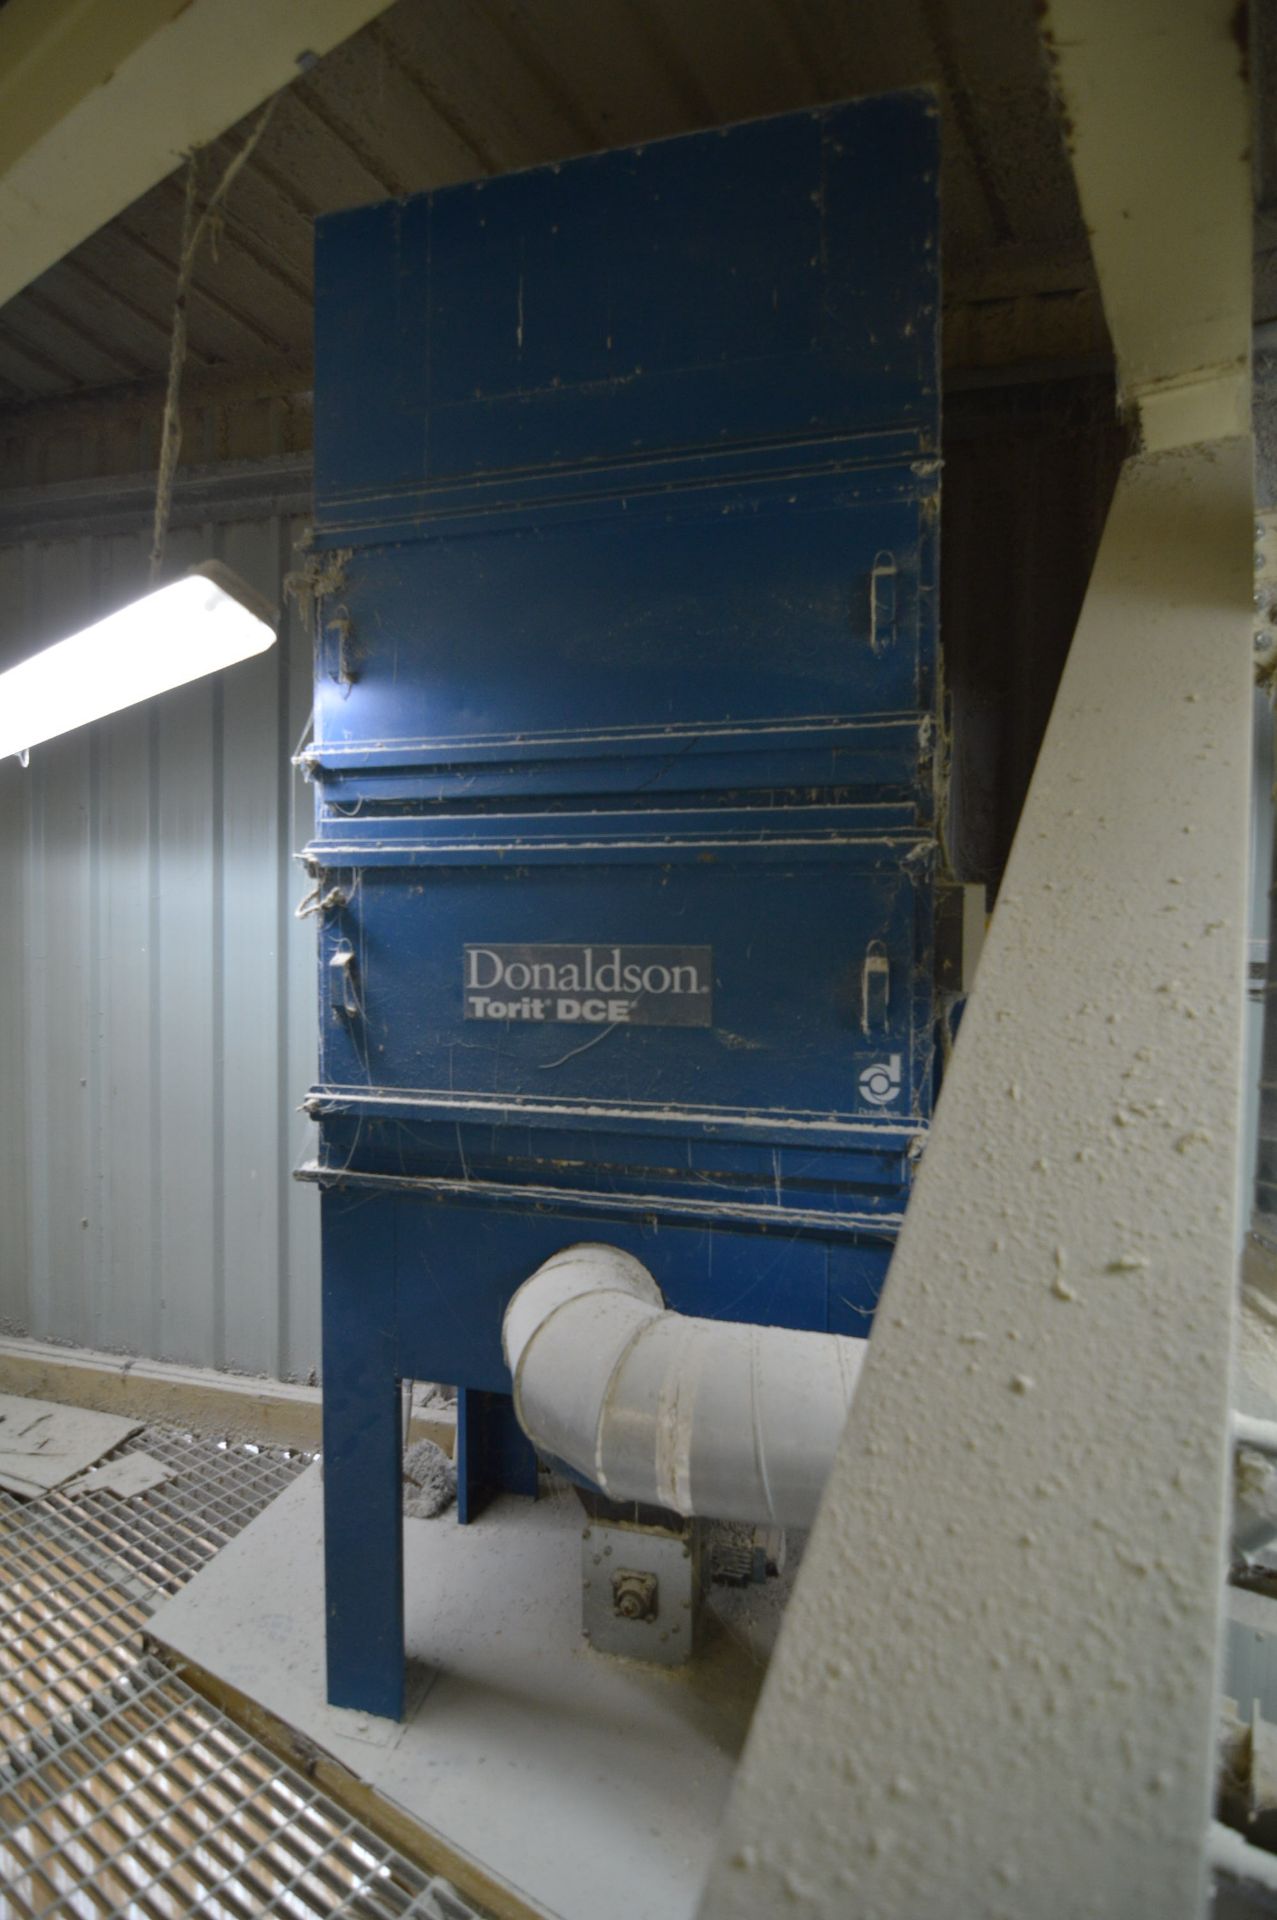 Donaldson Torit DCE UMA253K7 DUST COLLECTION UNIT, serial no. 000460143, year of manufacture 2012, - Image 2 of 2